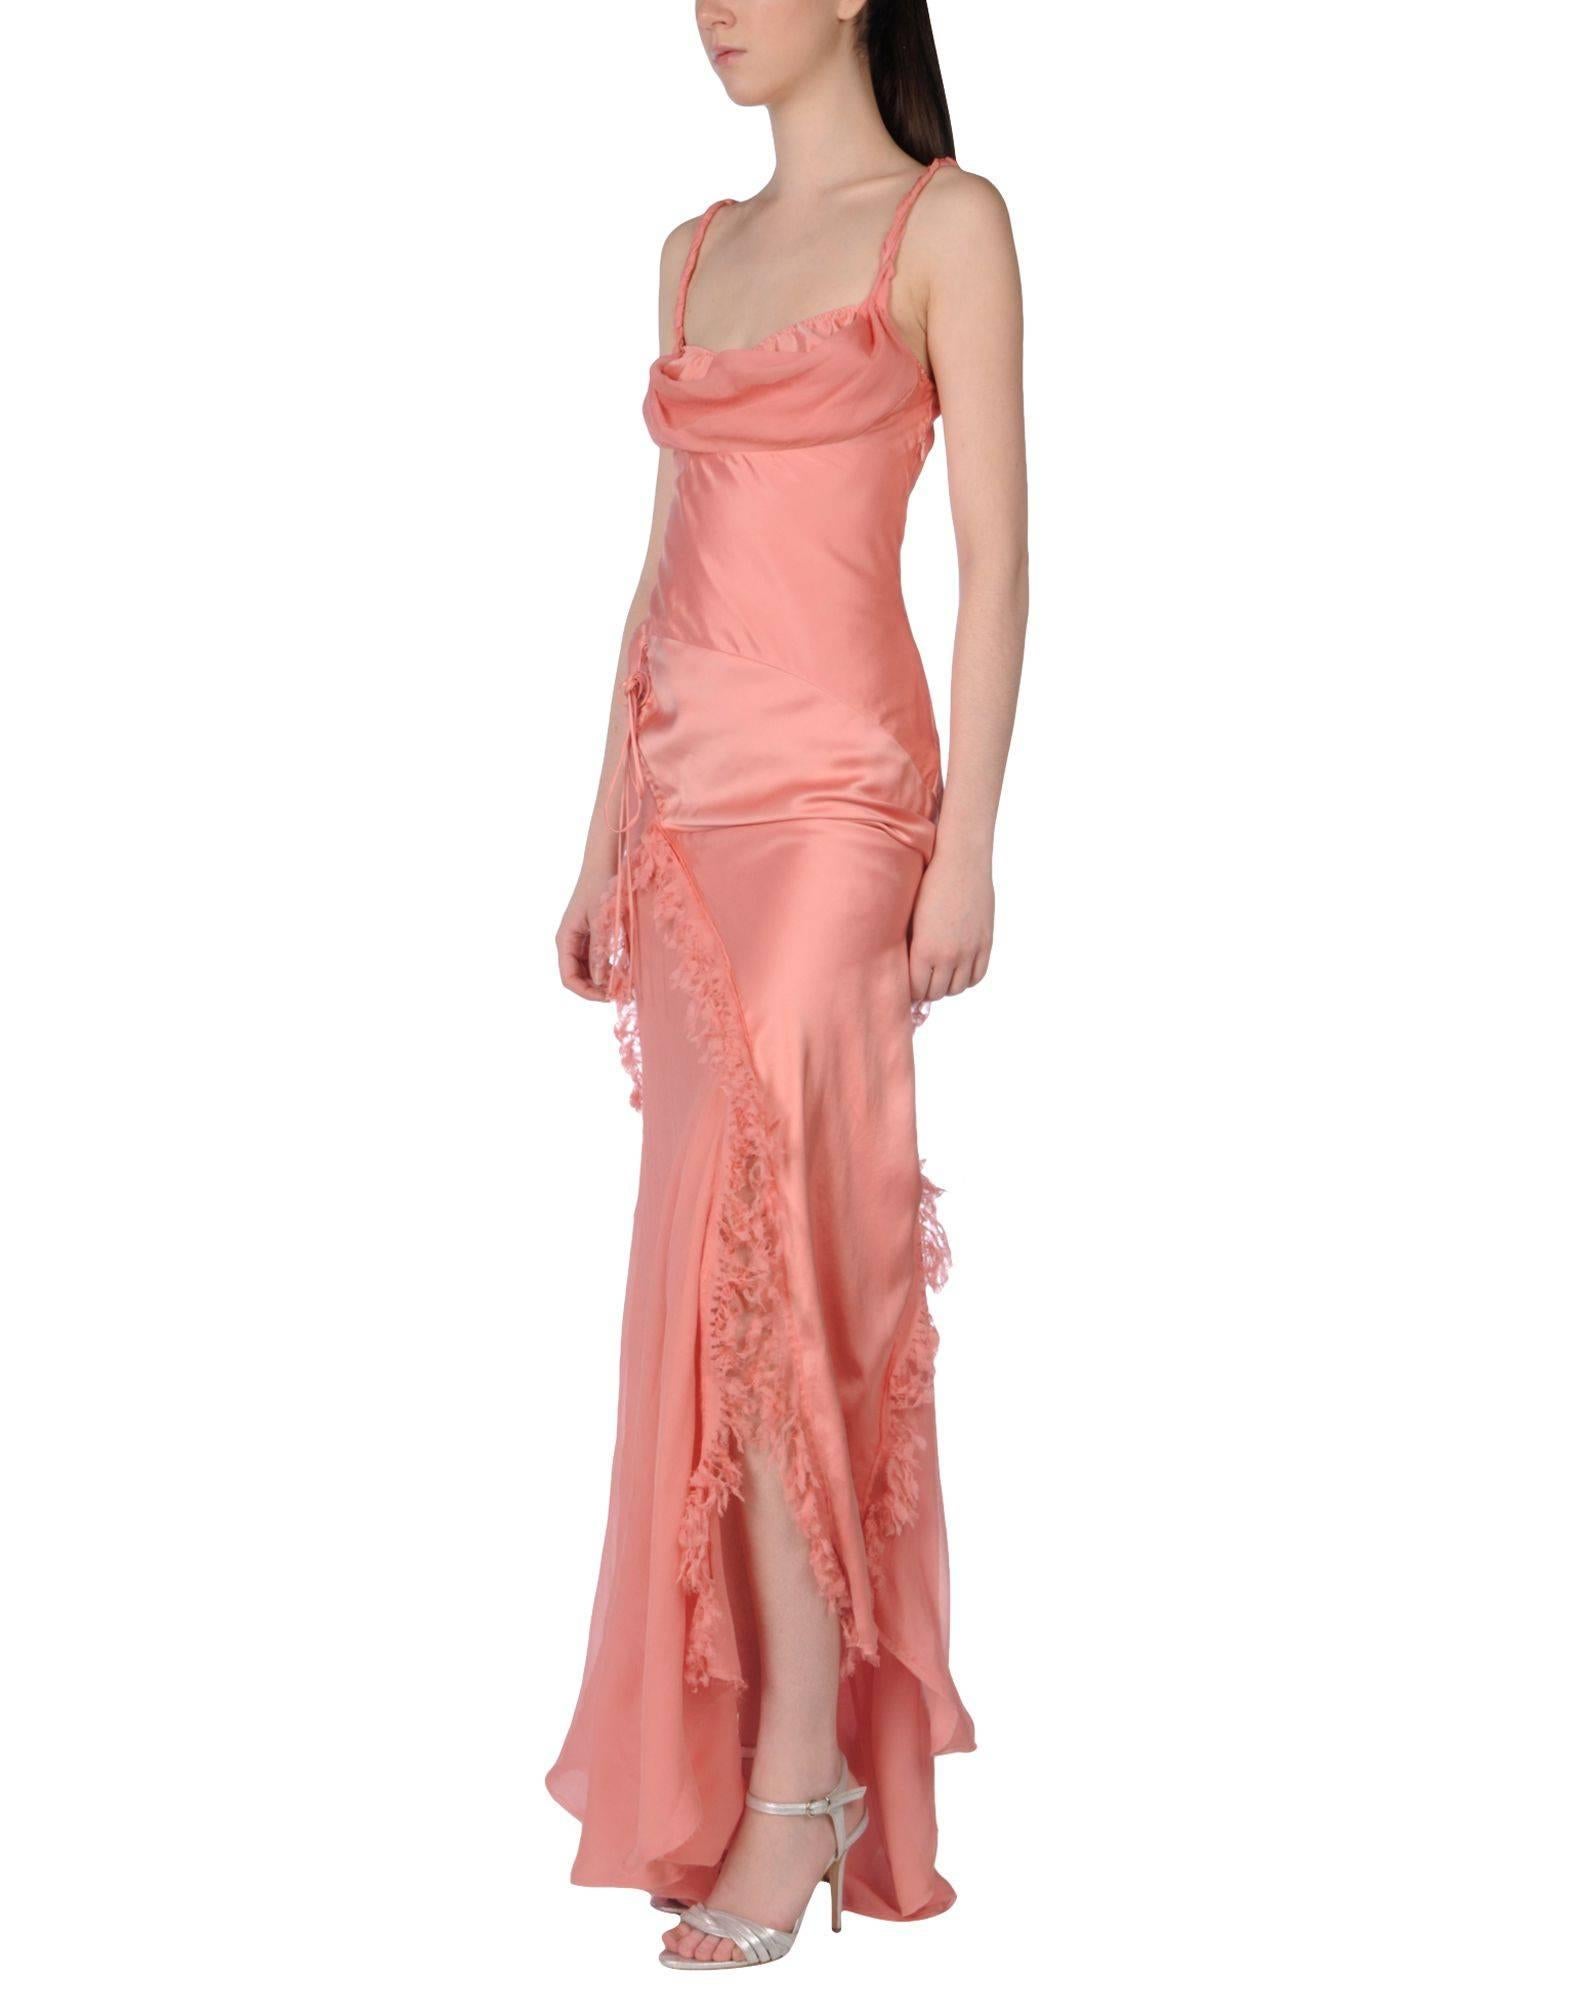 New ERMANNO SCERVINO Silk Ruffle Dress Gown
Italian size 42 - US 6
Open Back Style, High Front and Back Slits
100% Peach Color Silk
Made in Italy
New with tag.
